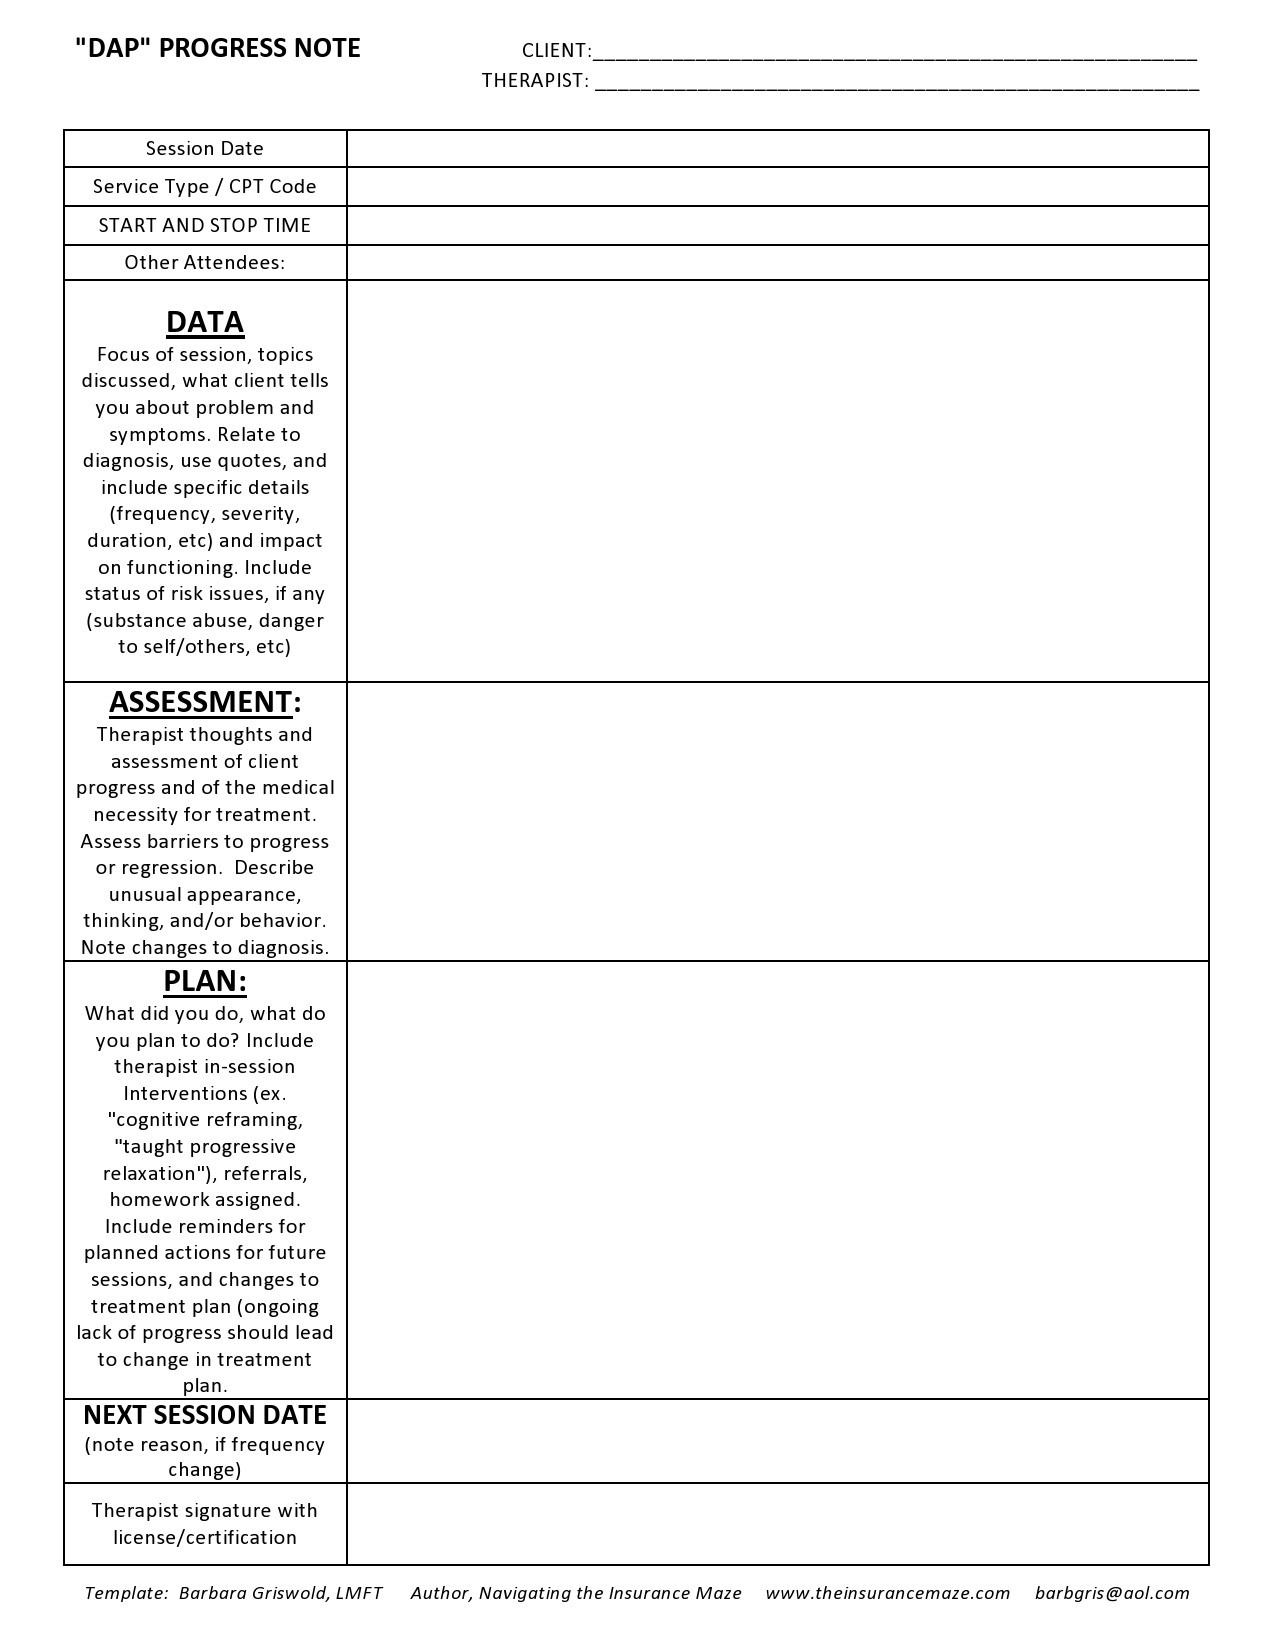 Free Therapy Notes Template from templatelab.com